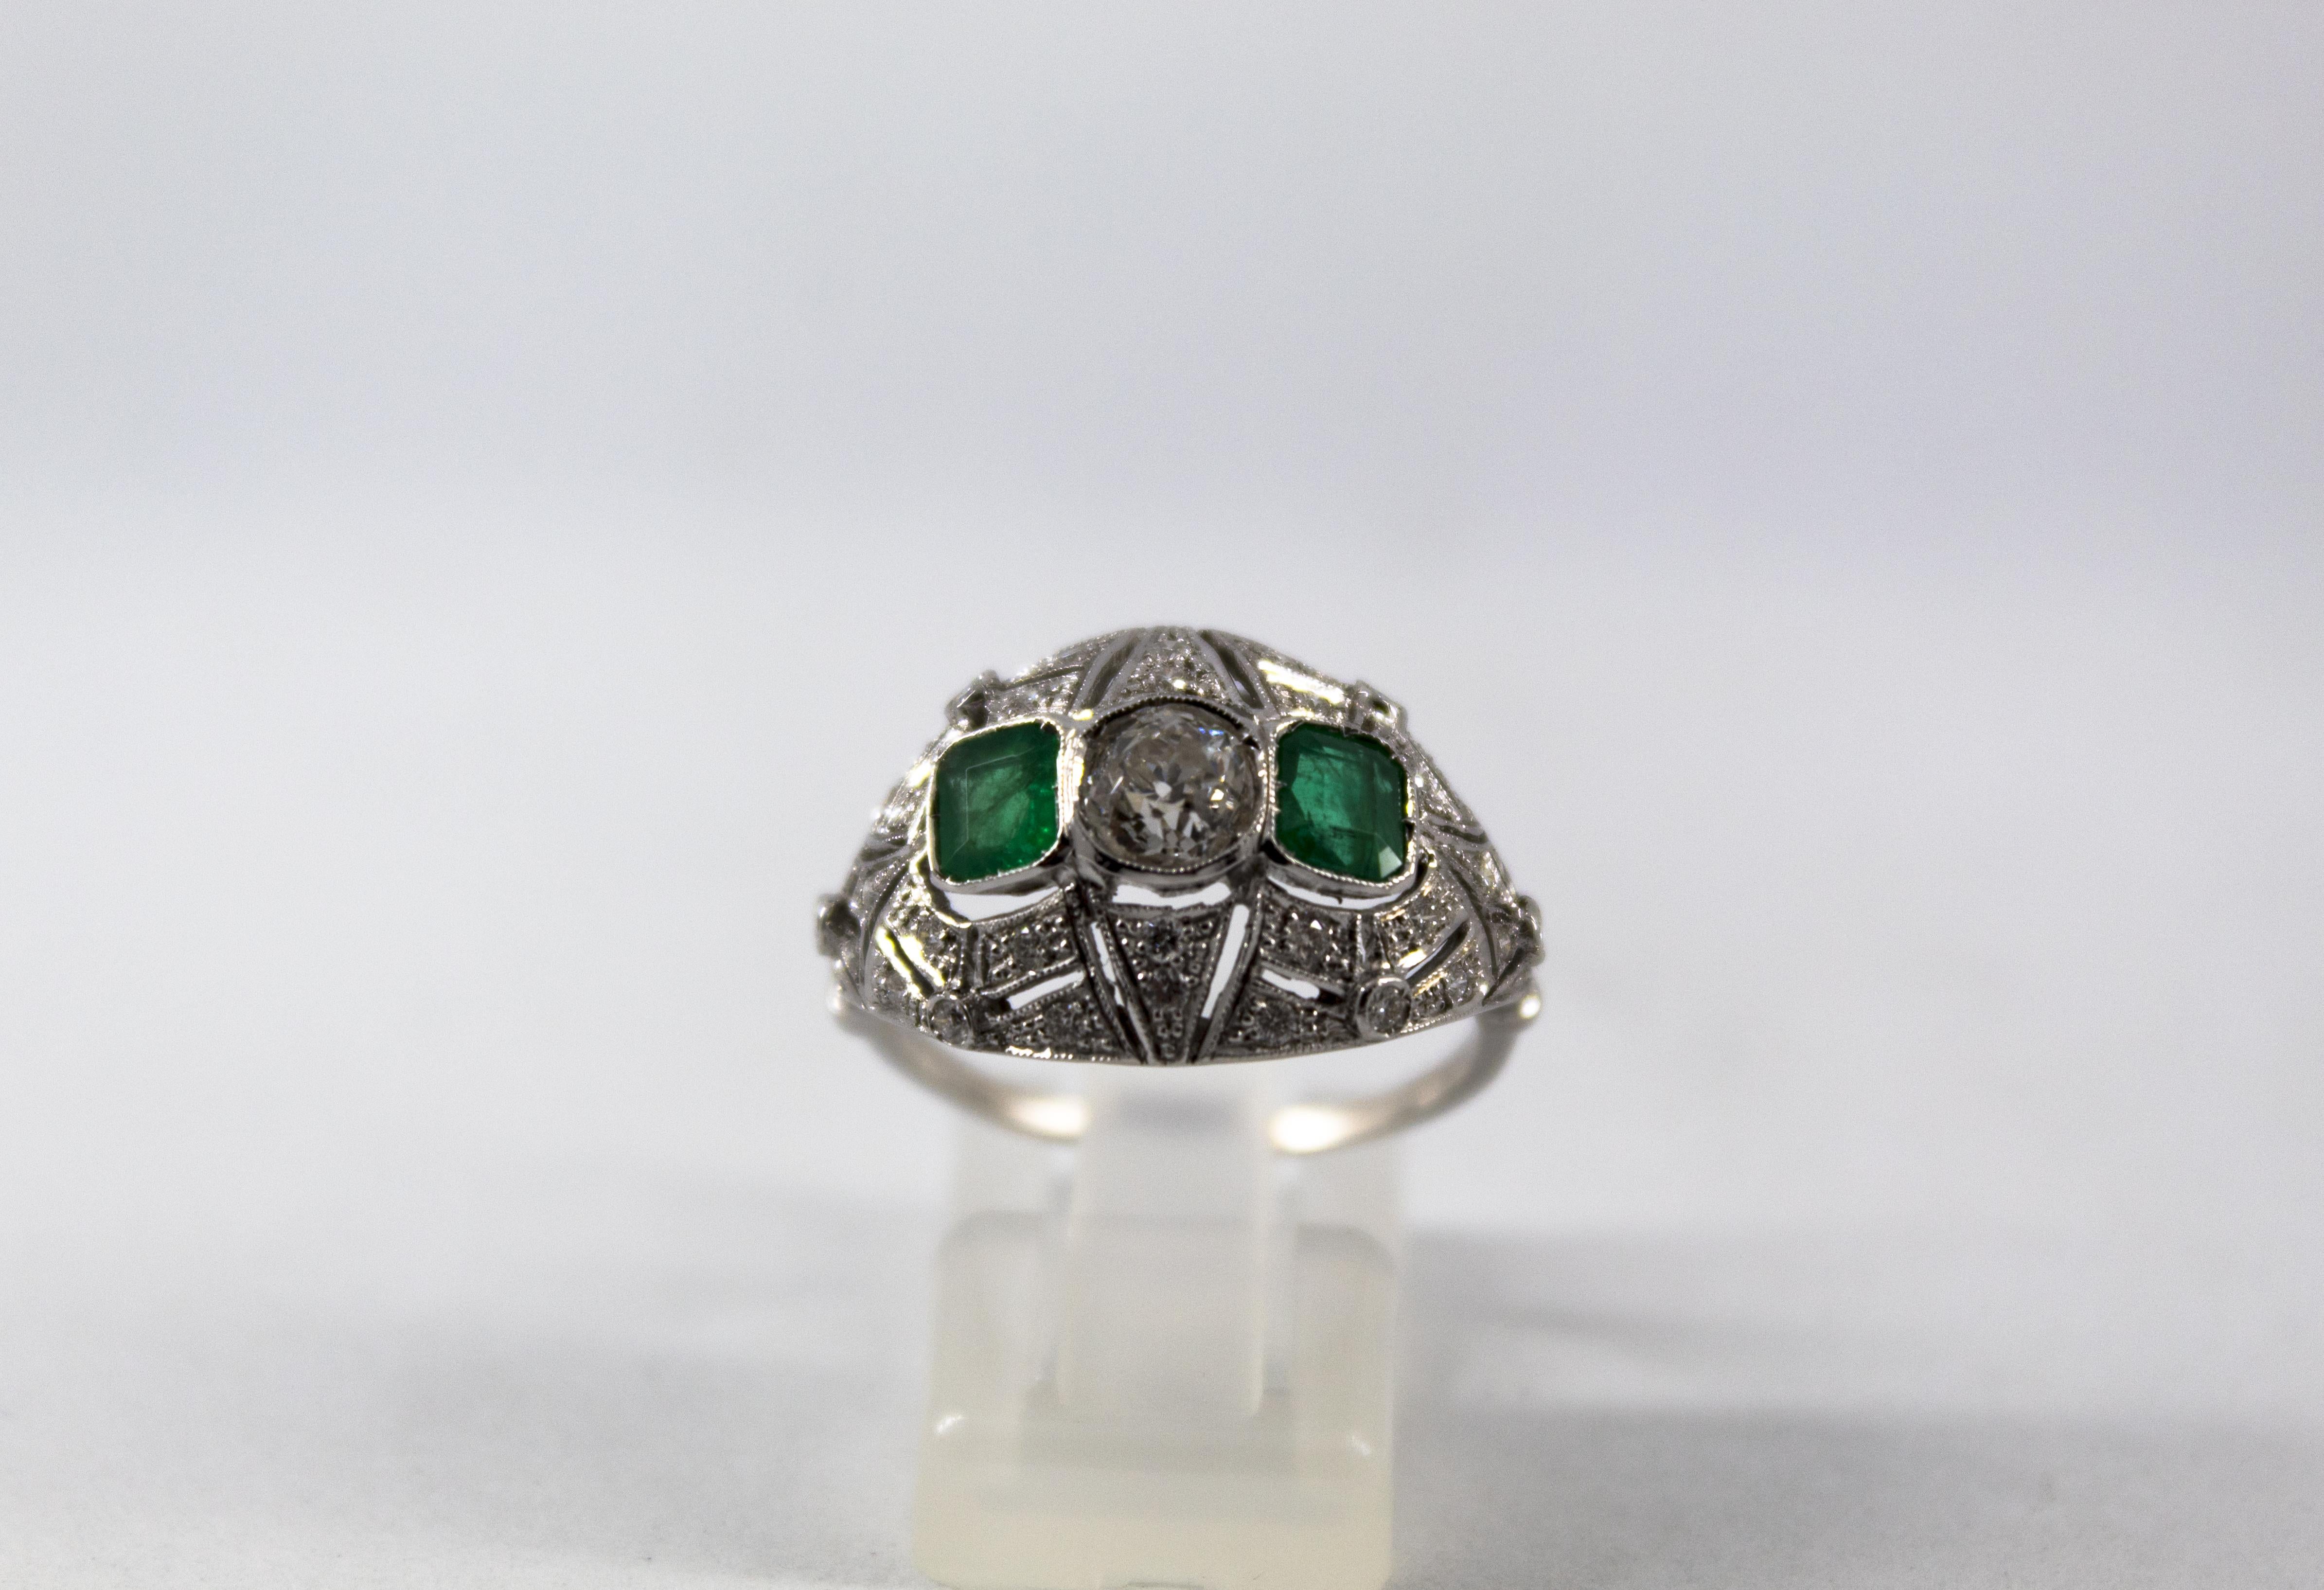 This Ring is made of 18K White Gold.
This Ring has 1.00 Carats of White Diamonds.
This Ring has 0.60 Carats of Emeralds.
This Ring is inspired by Renaissance Style.
Size ITA: 17 USA: 8
We're a workshop so every piece is handmade, customizable and